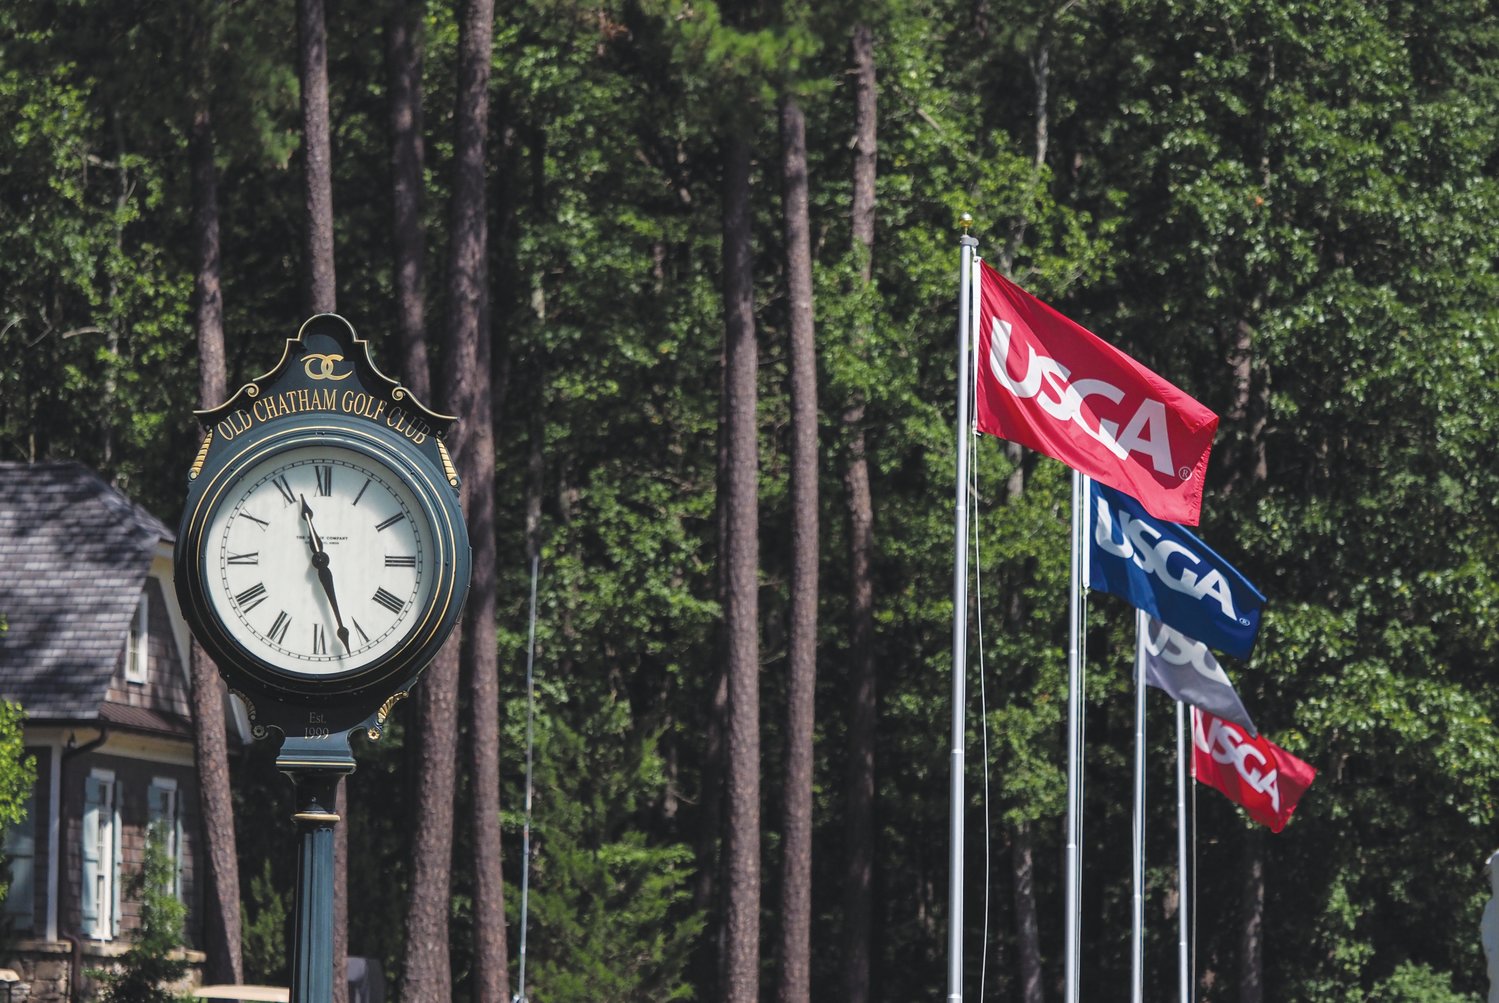 Old Chatham Golf Club hosted the U.S. Senior Amateur in 2019, the club's first USGA championship event.